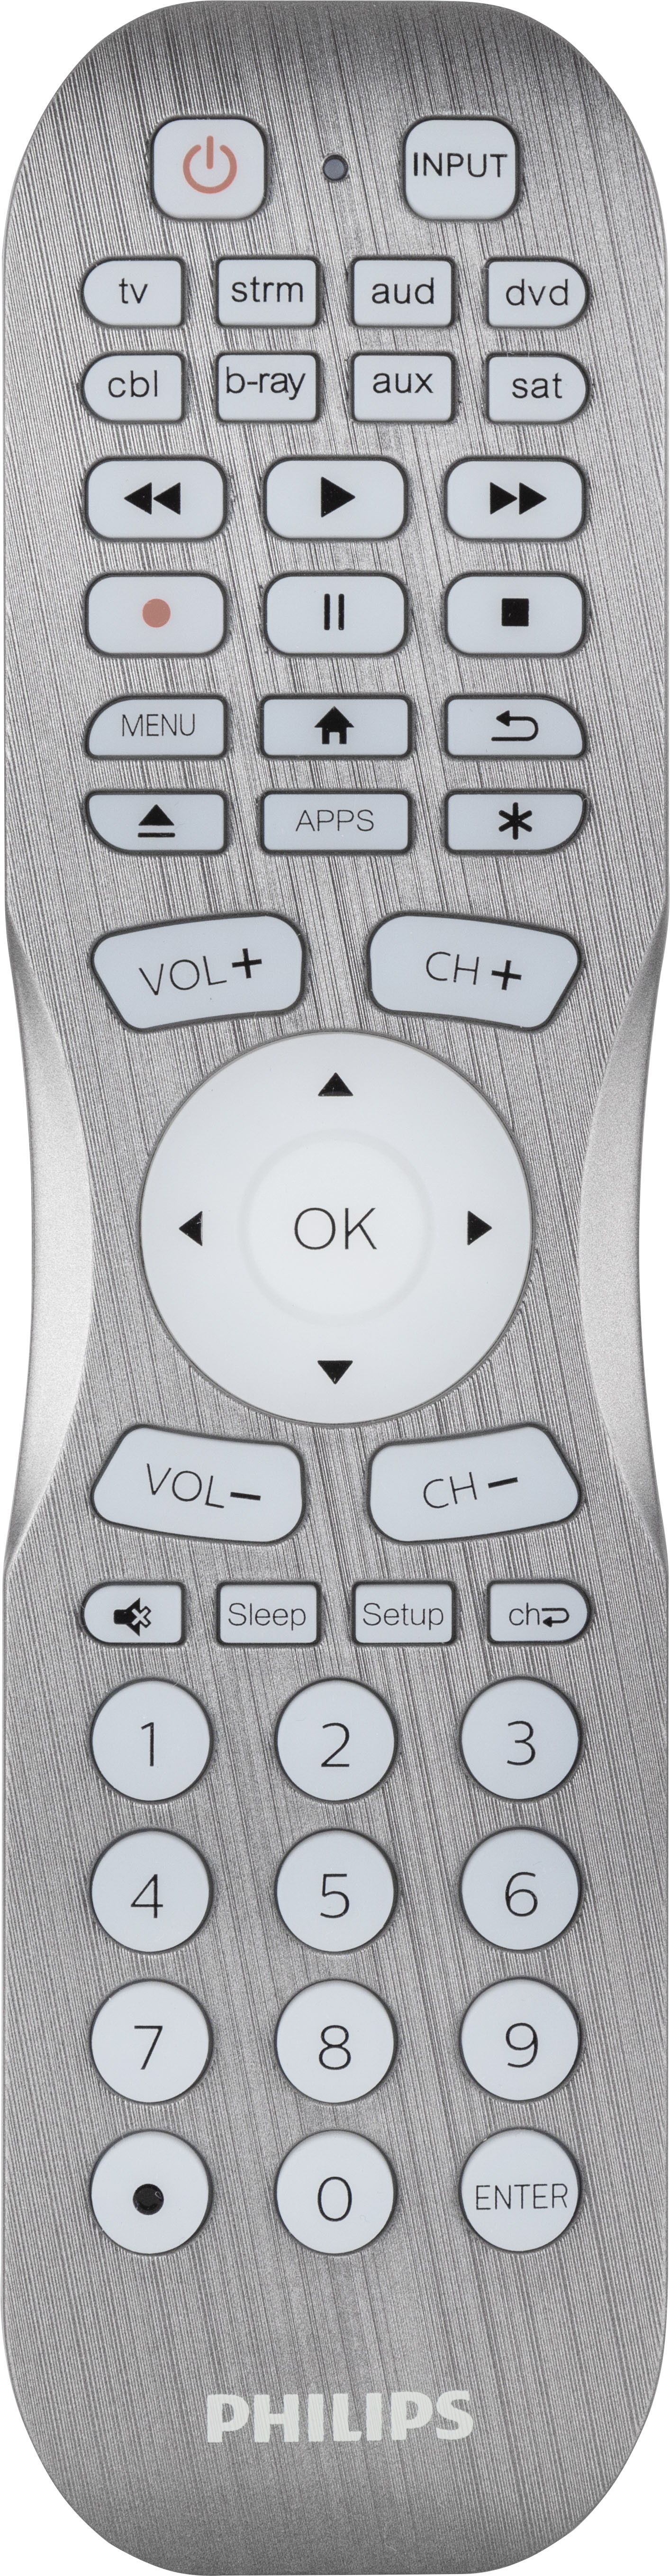 Philips - 8 Device Backlit Universal Remote Control - Brushed Graphite